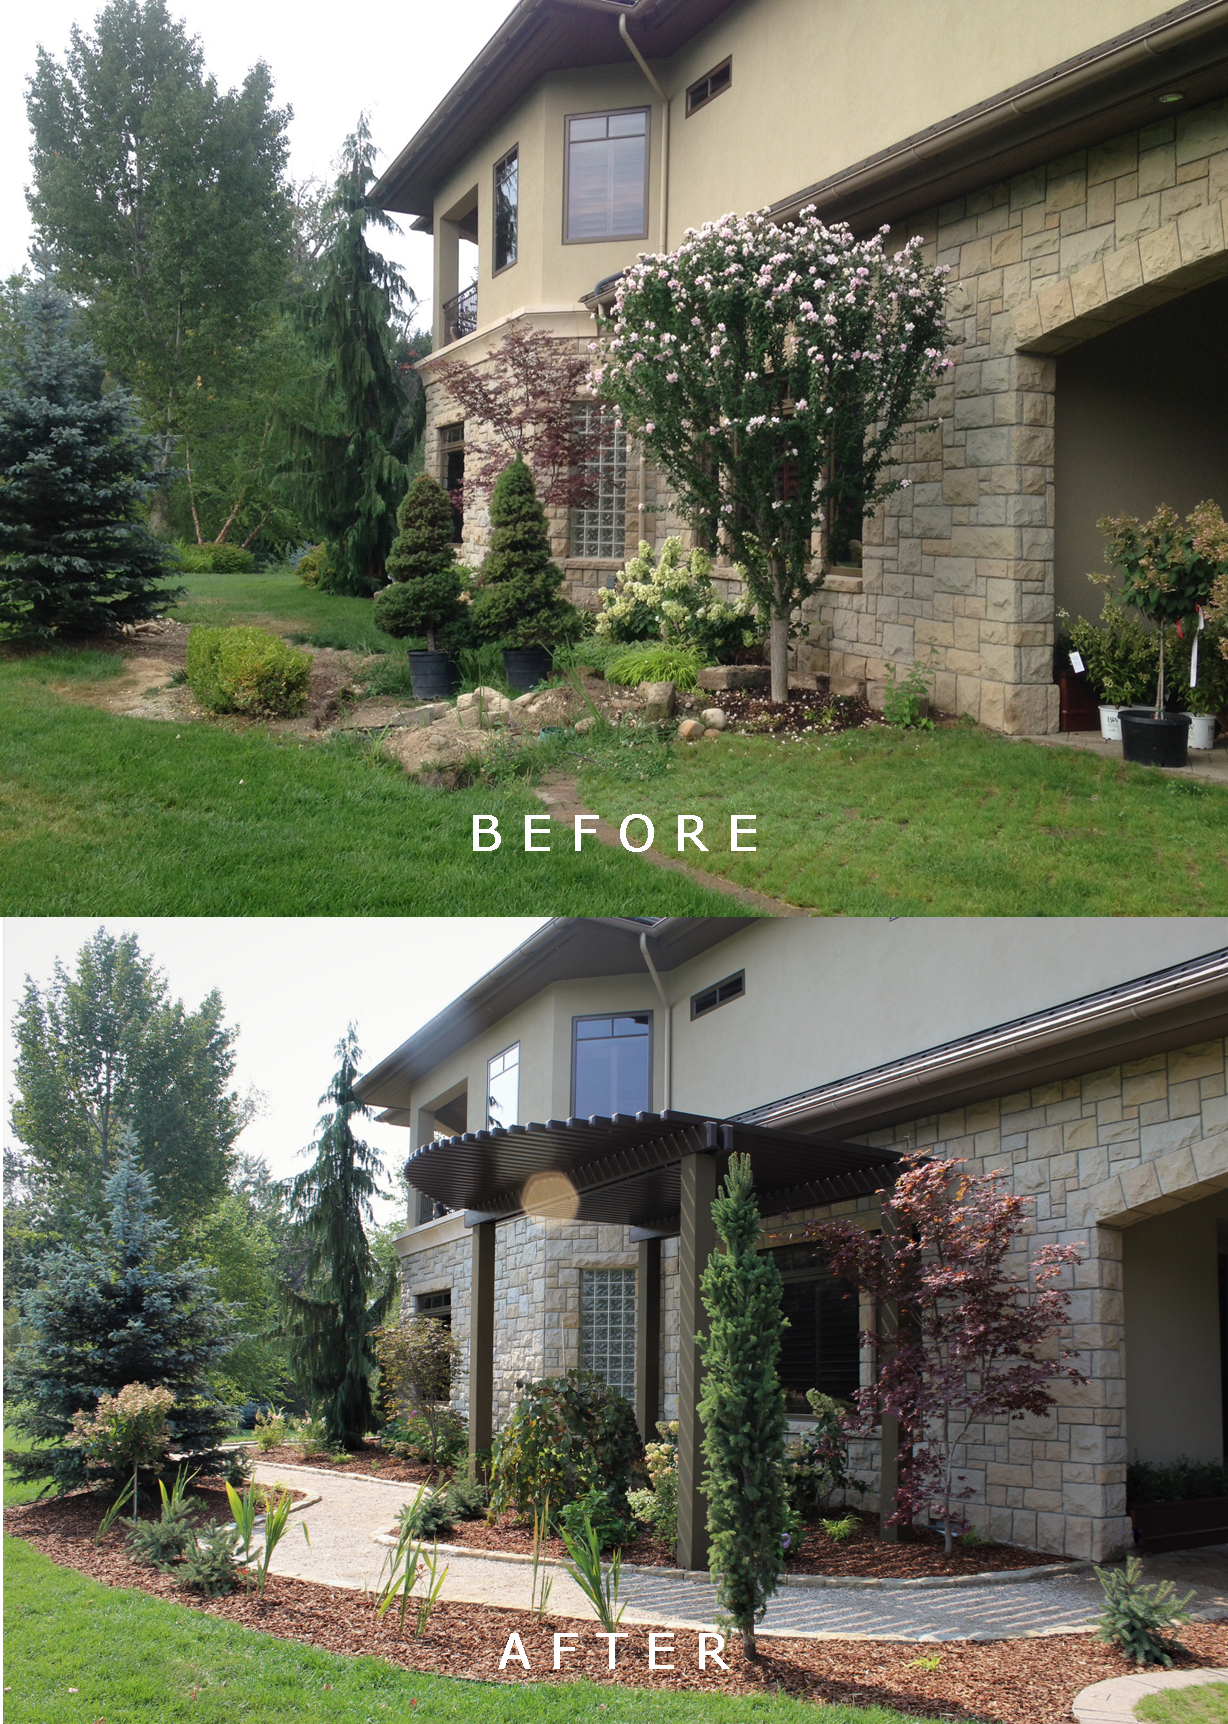 Zasio Residence: Before/After | The Garden Artist Boise, ID